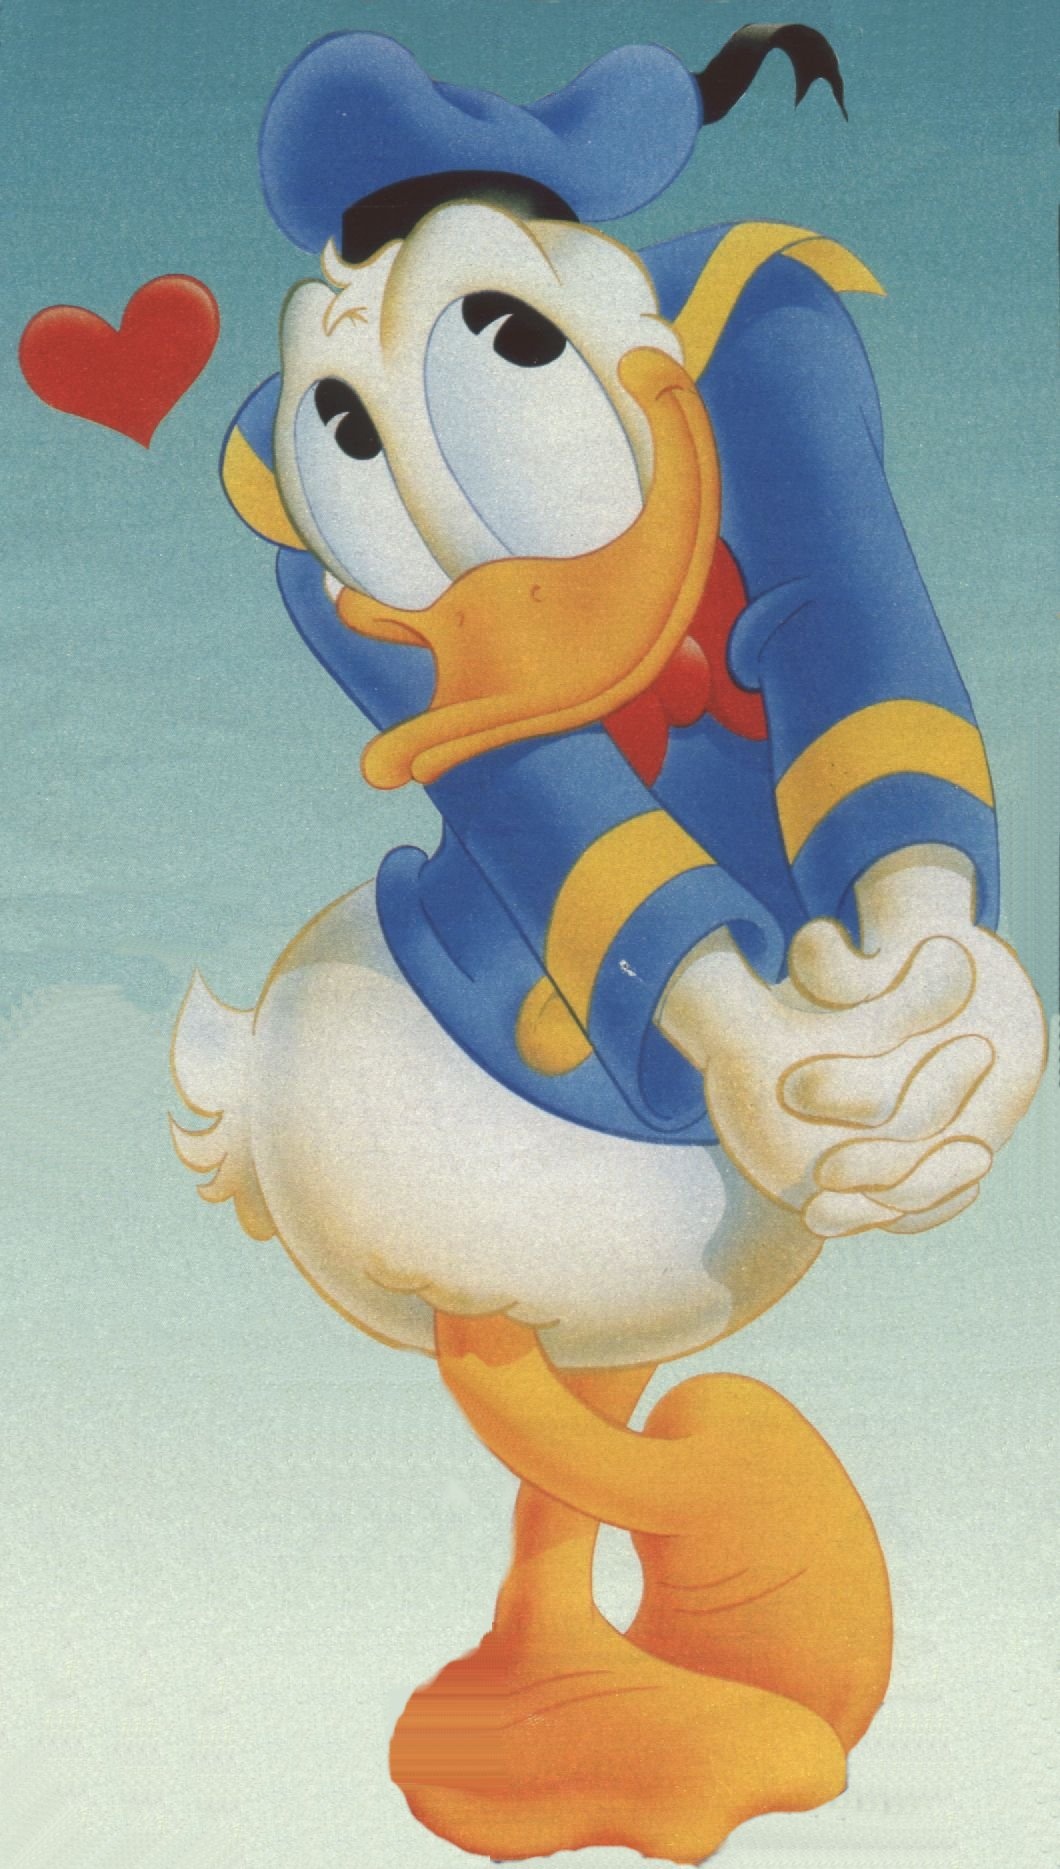 Source Donald Duck back